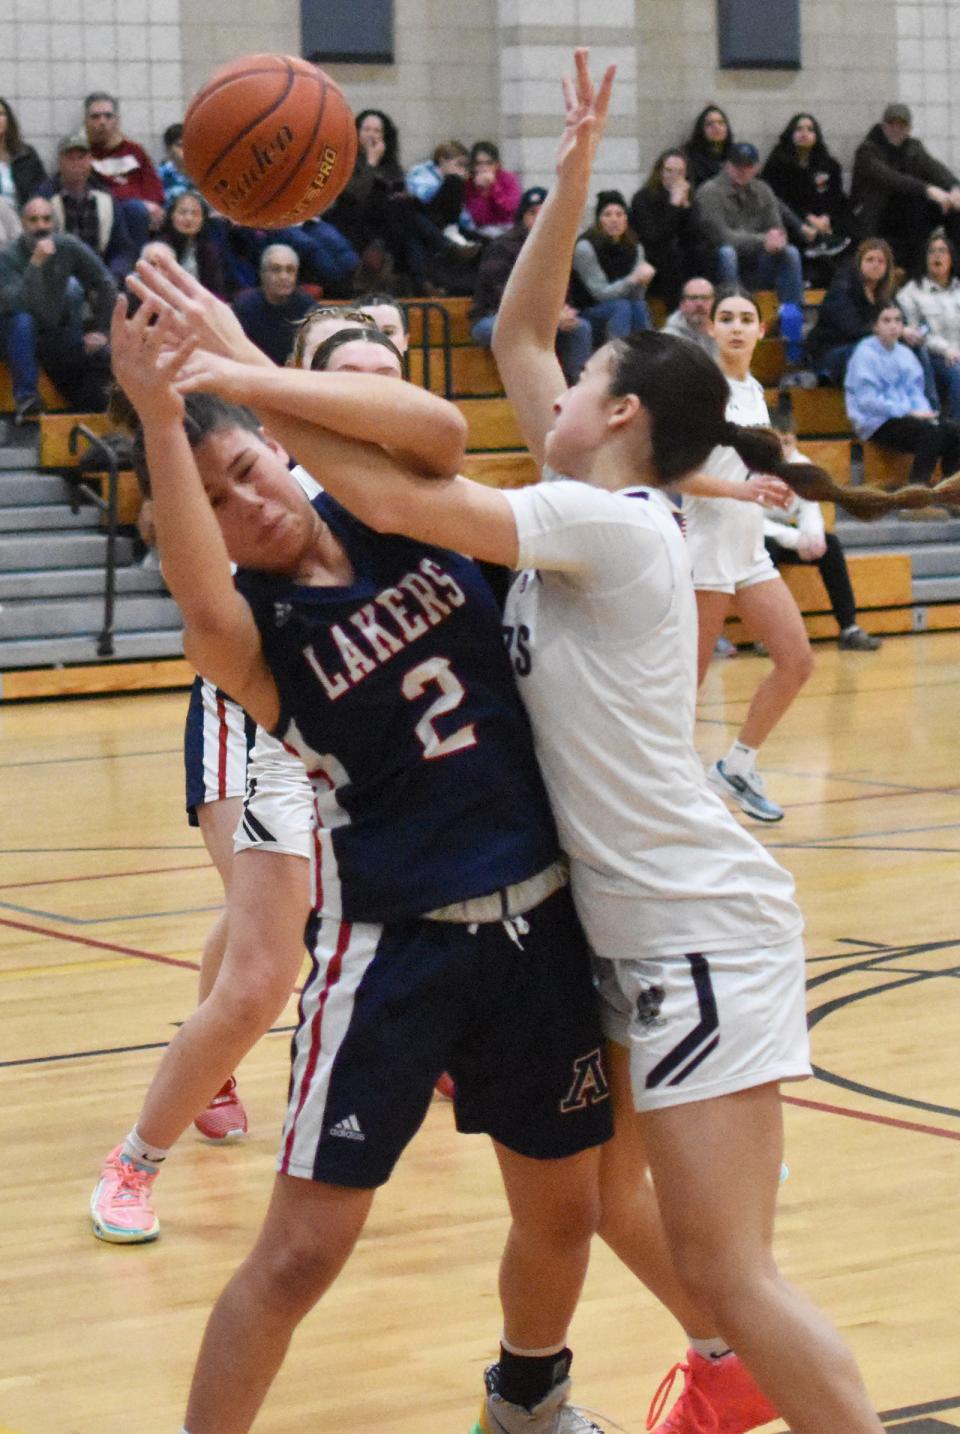 Apponequet's Cynthia Morales and Somerset Berkley's Karlie Cosme collide under the basket during Tuesday night's South Coast Conference game at Somerset Berkley Regional High School.